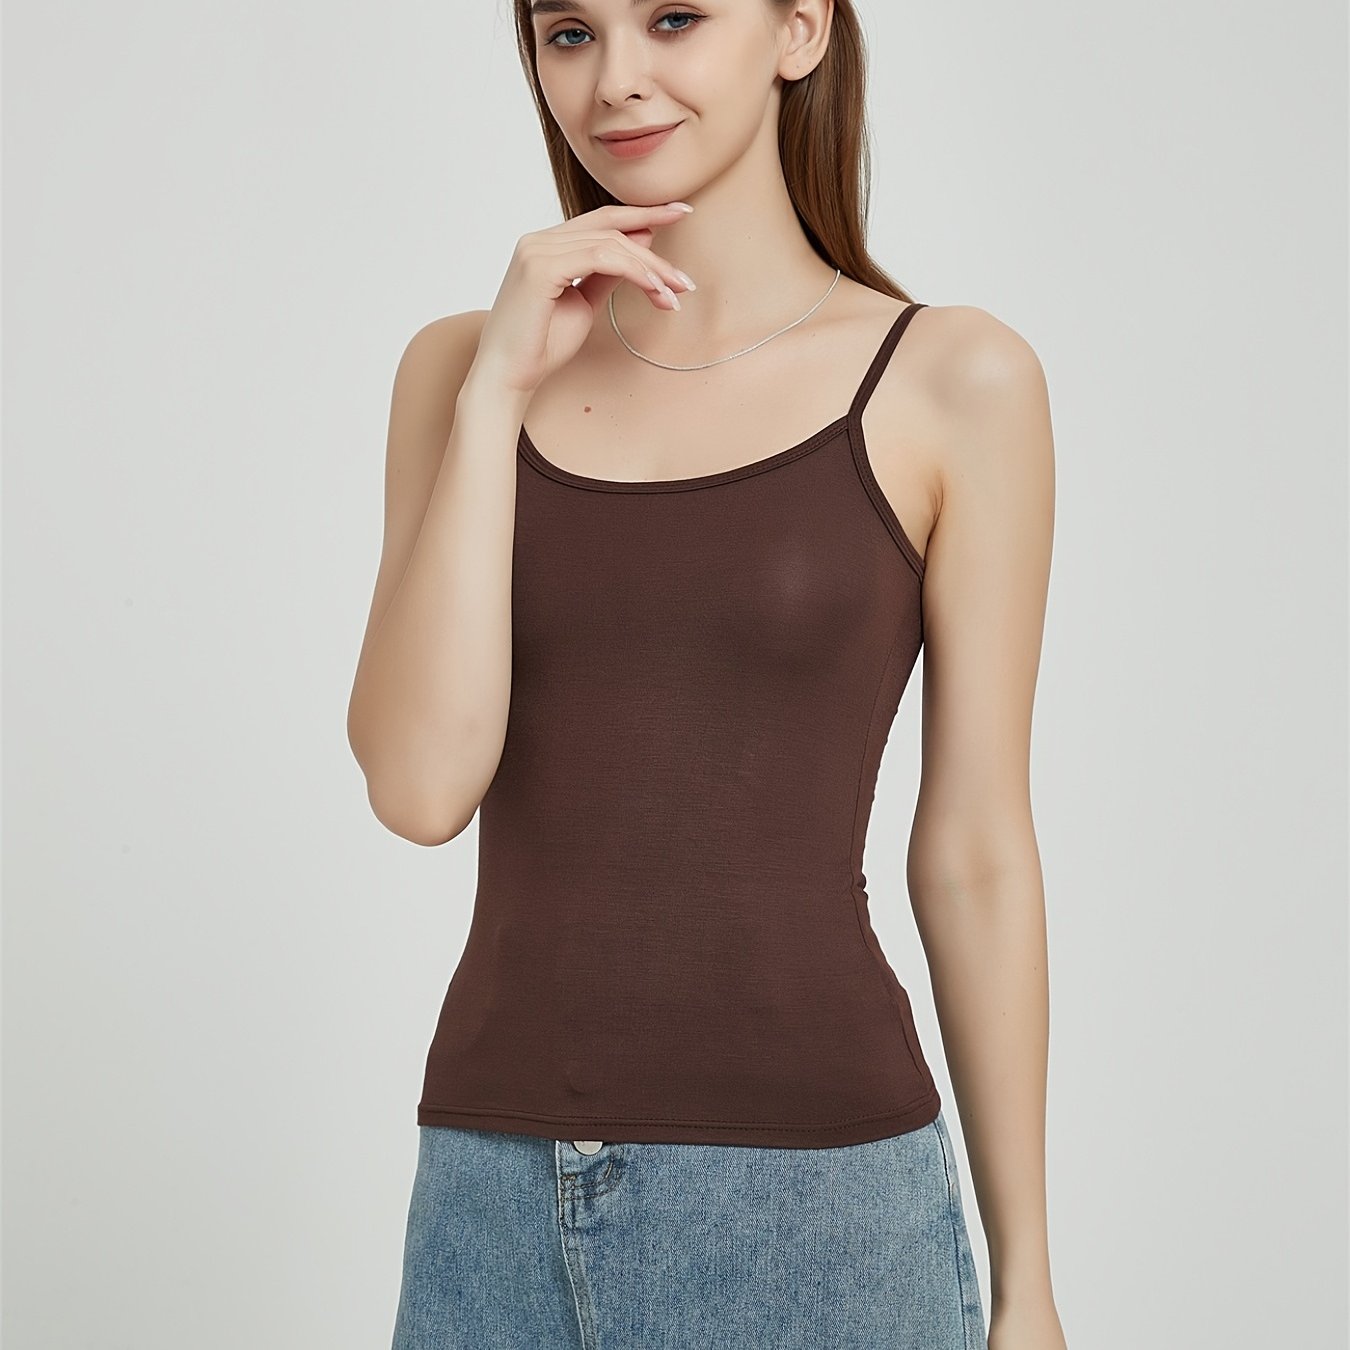 Everbellus Womens Sexy Basic Solid Tank Top Spaghetti Strap